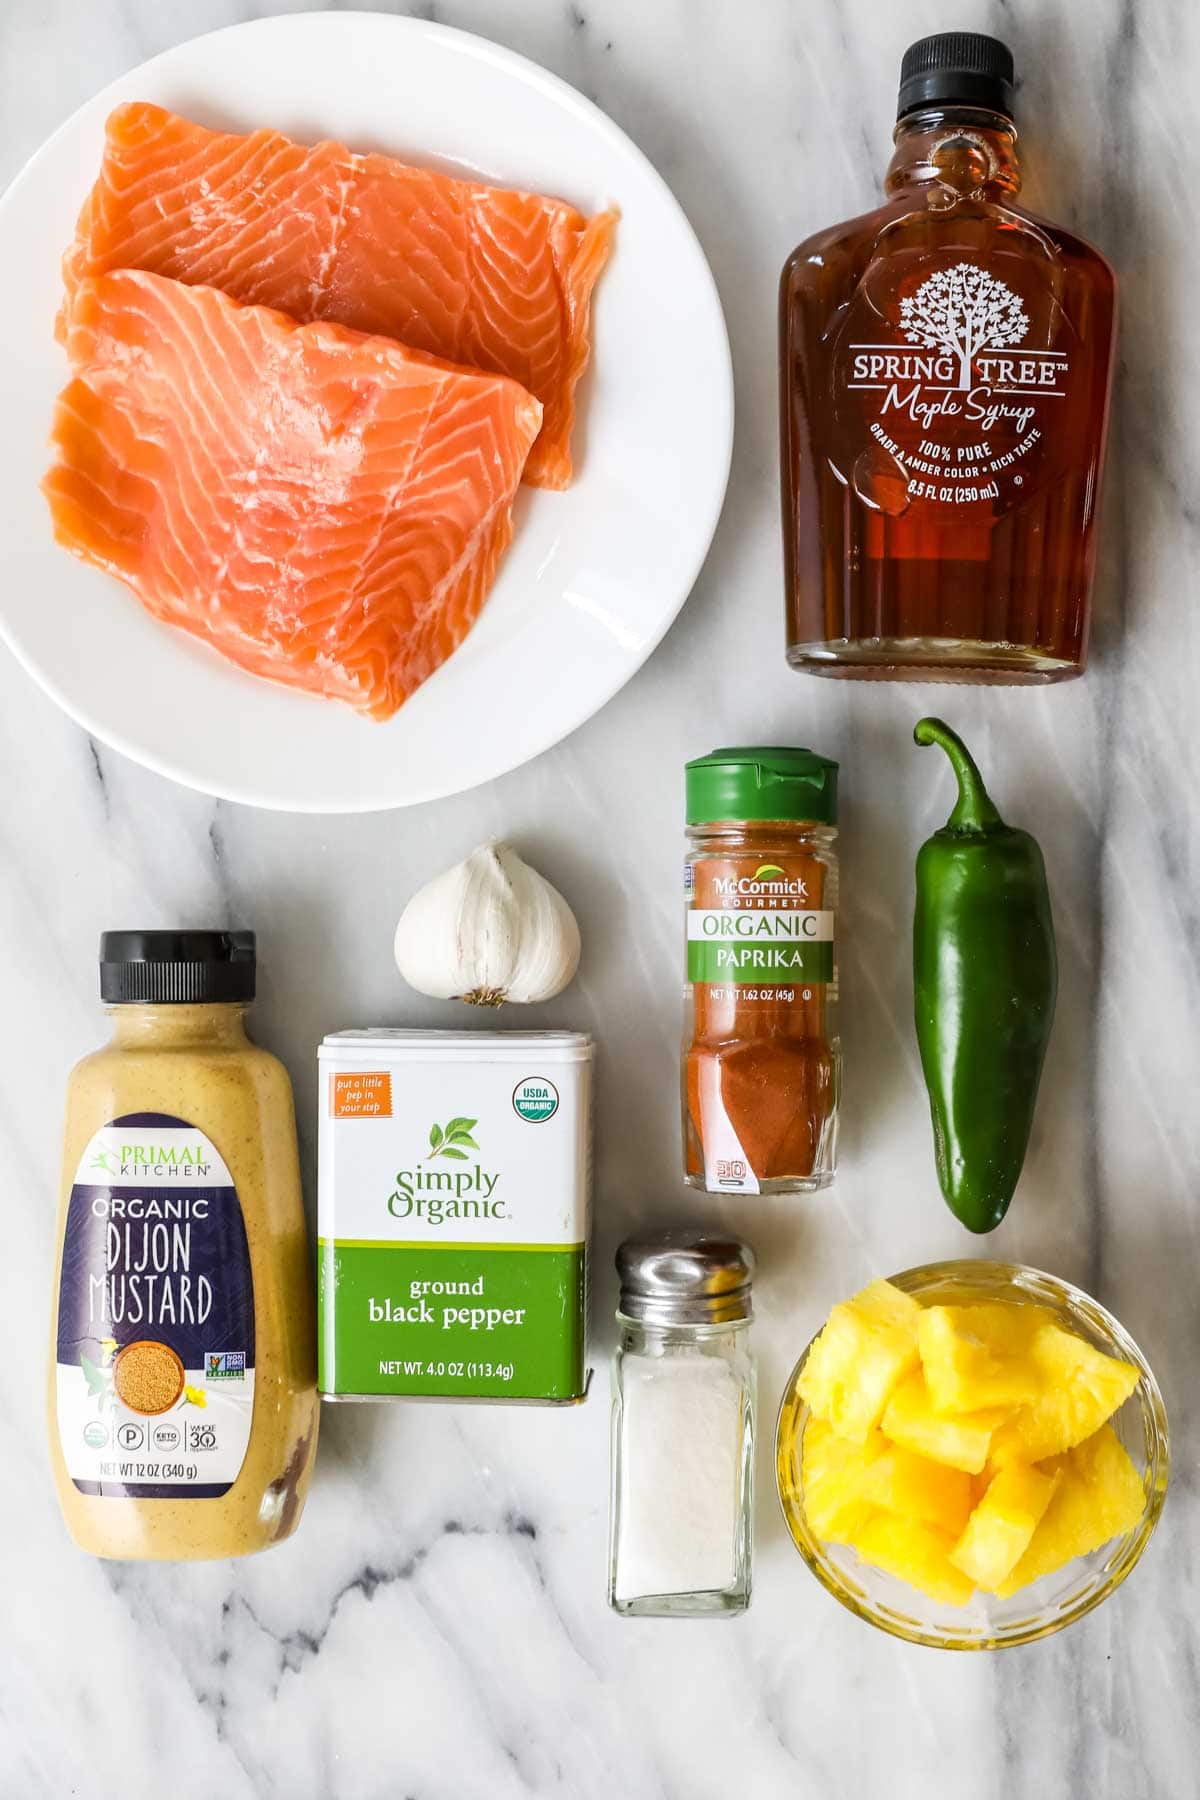 Overhead view of ingredients including salmon, maple syrup, pineapple, jalapeno, and more.